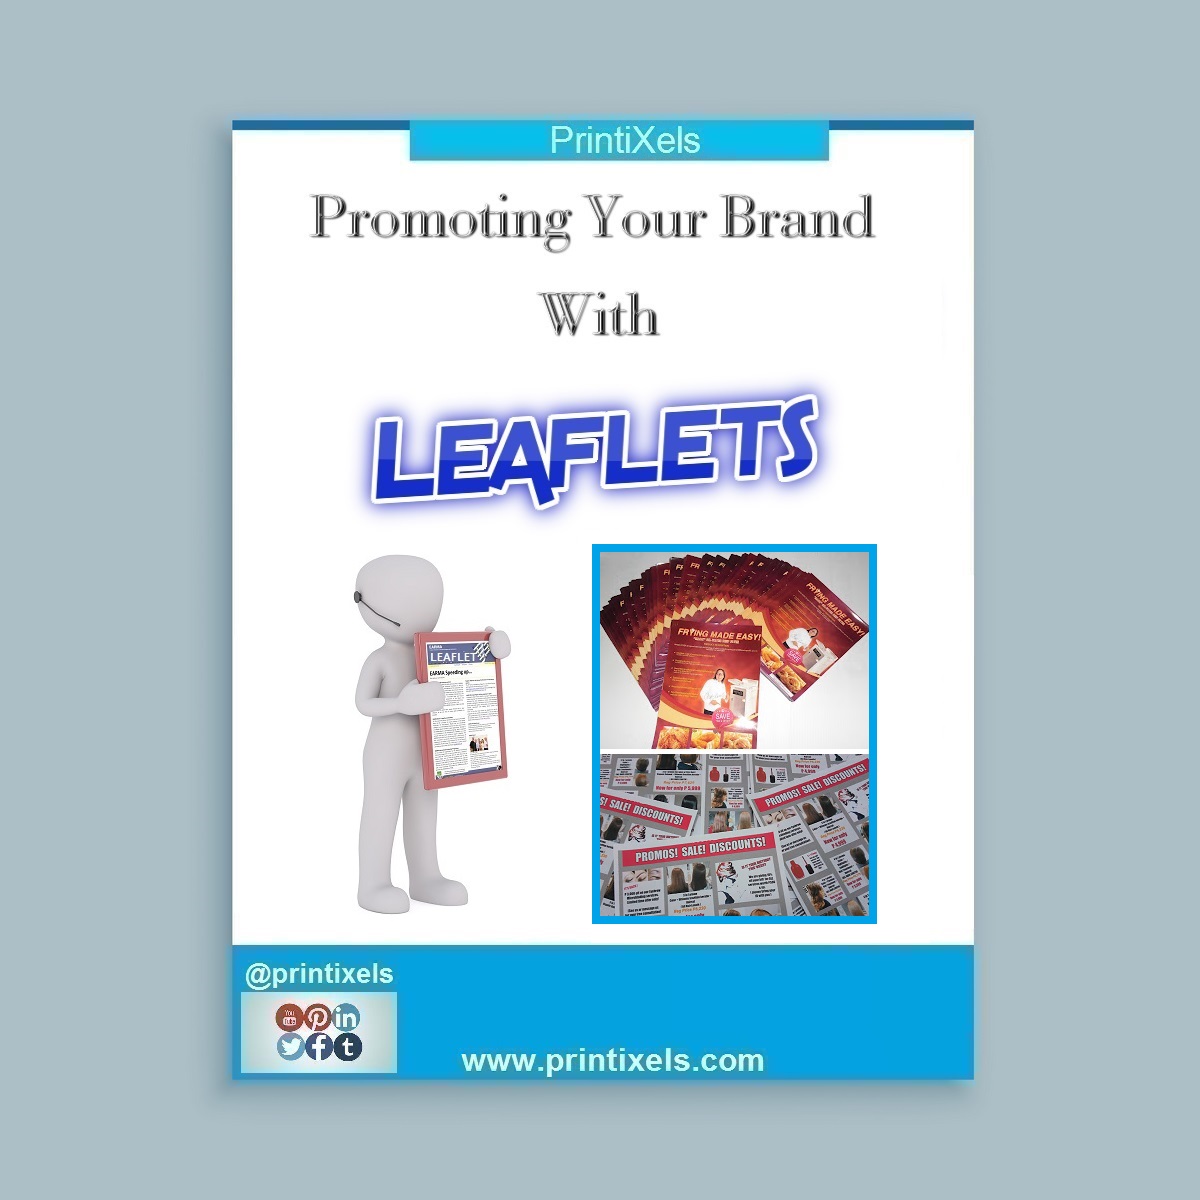 Promoting Your Brand With Leaflets in the Philippines